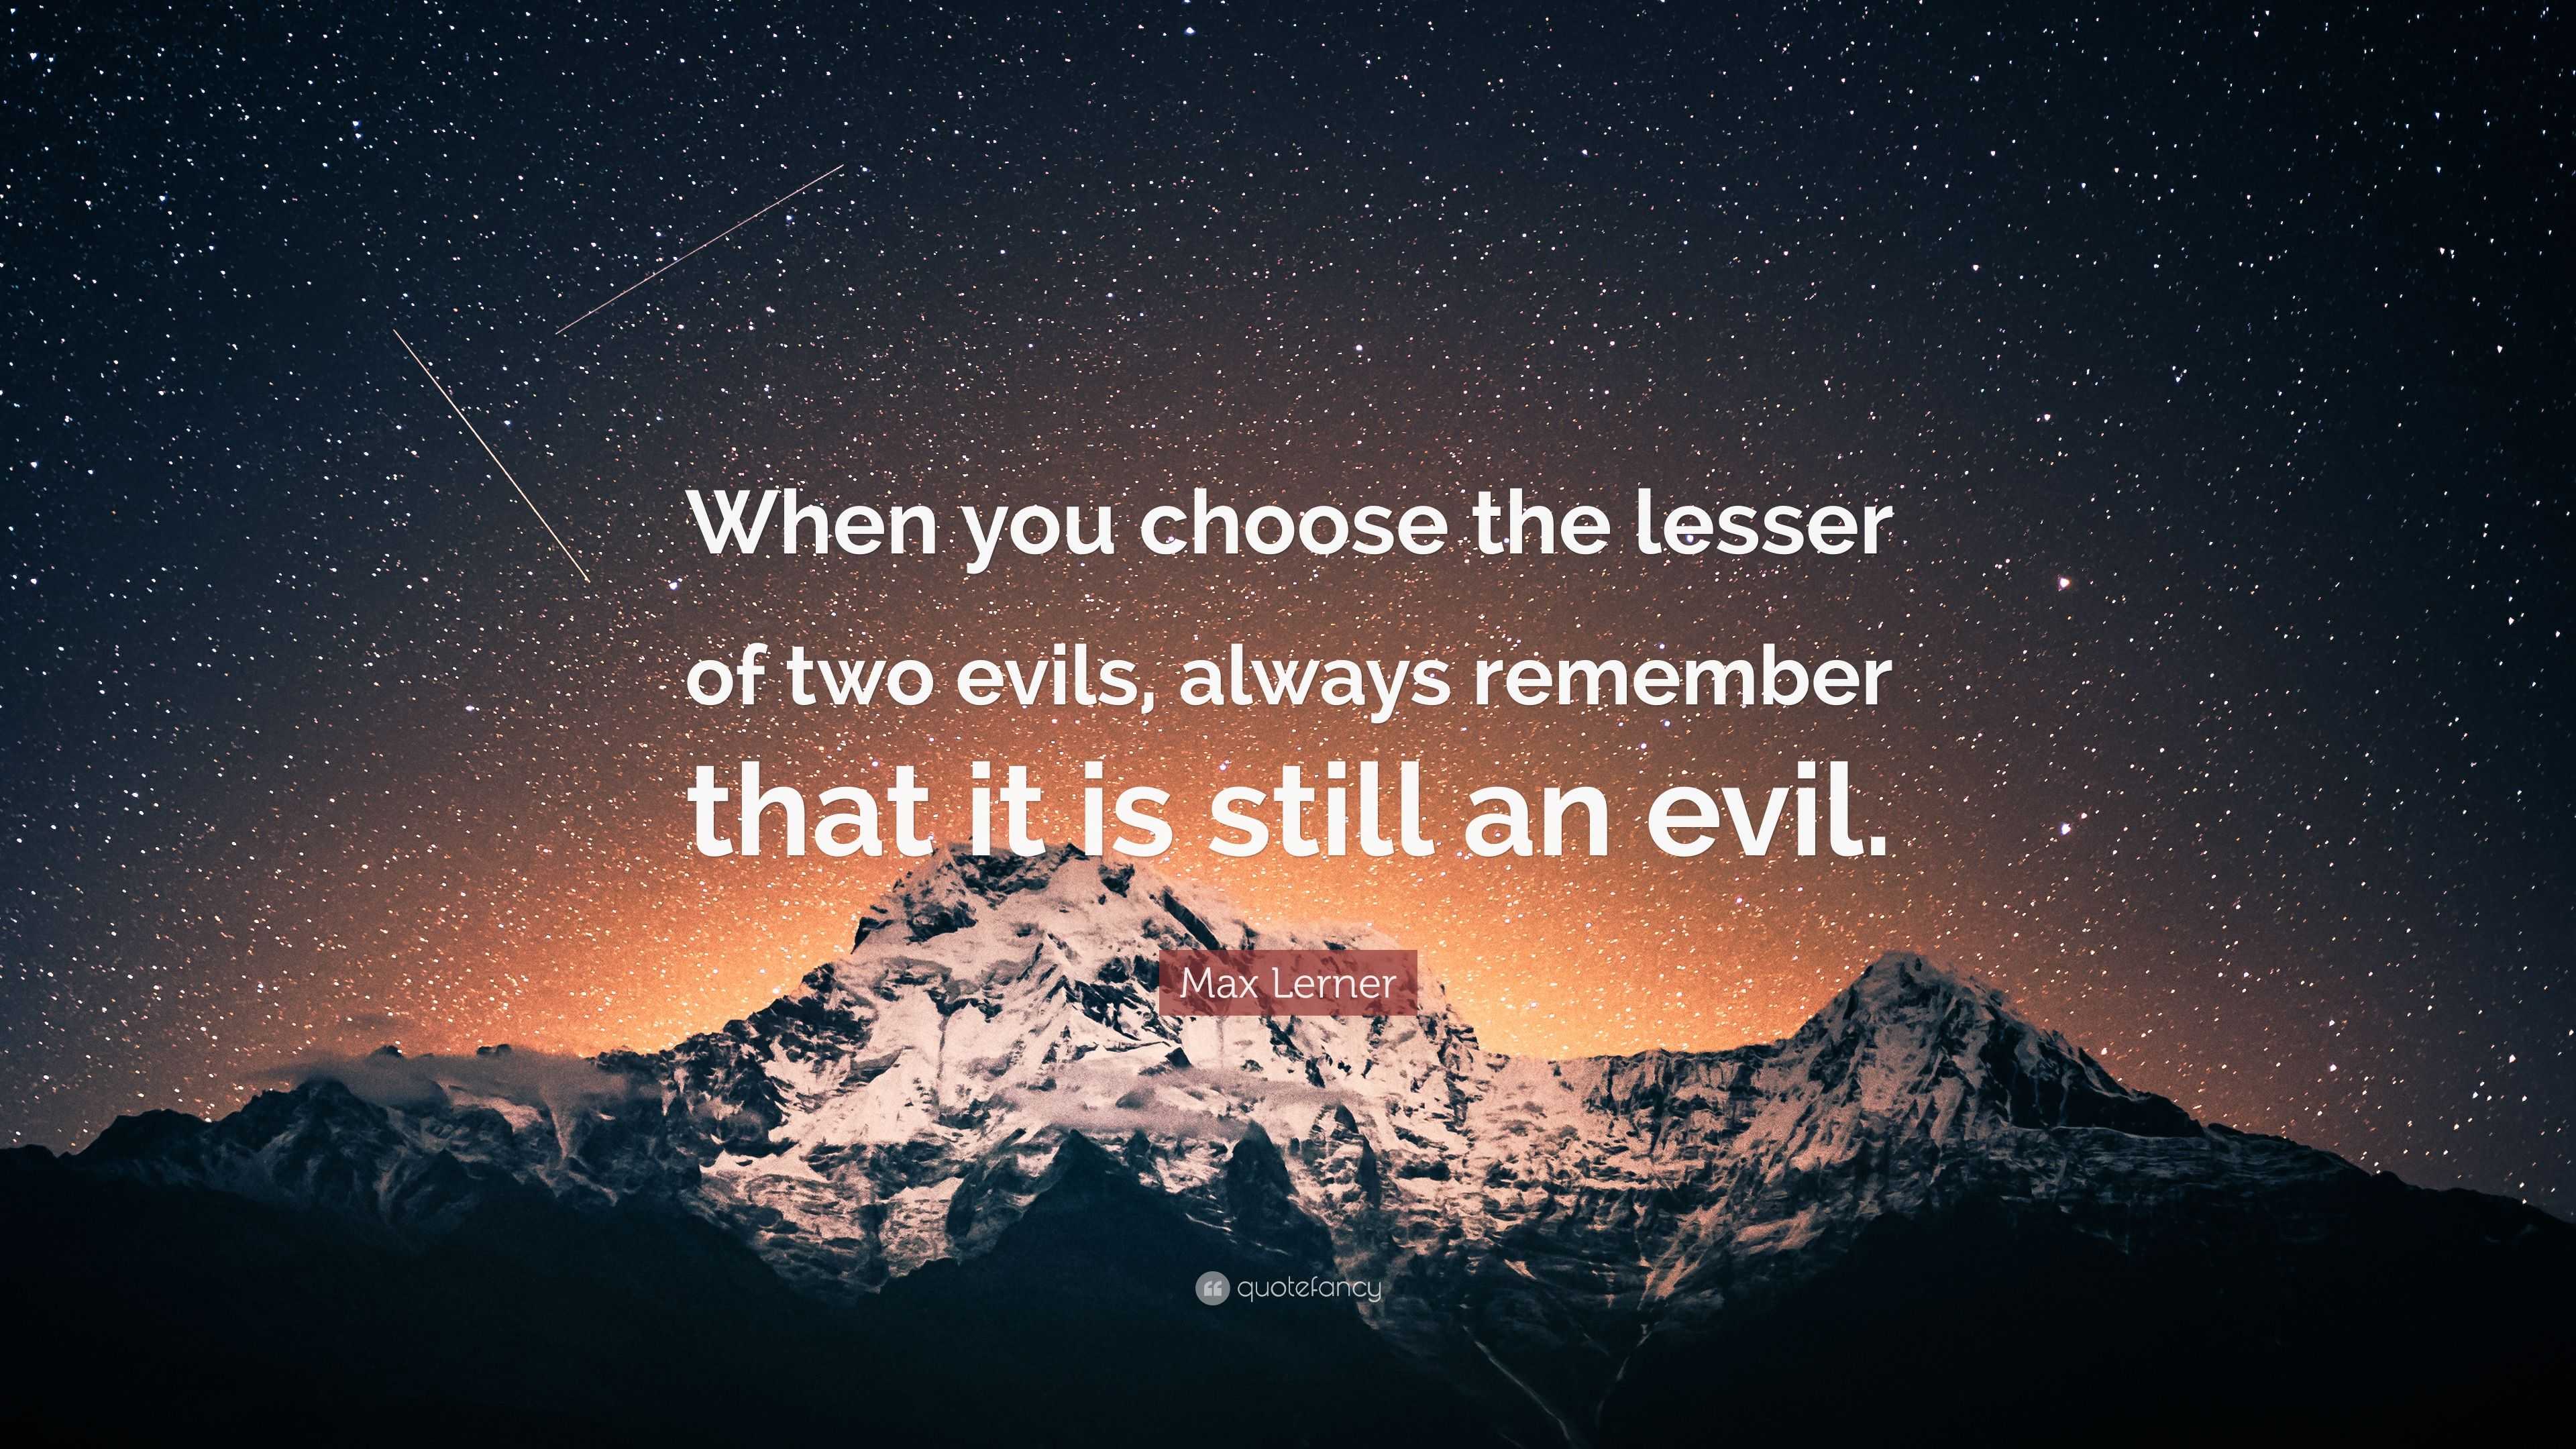 Max Lerner Quote: “When you choose the lesser of two evils, always ...